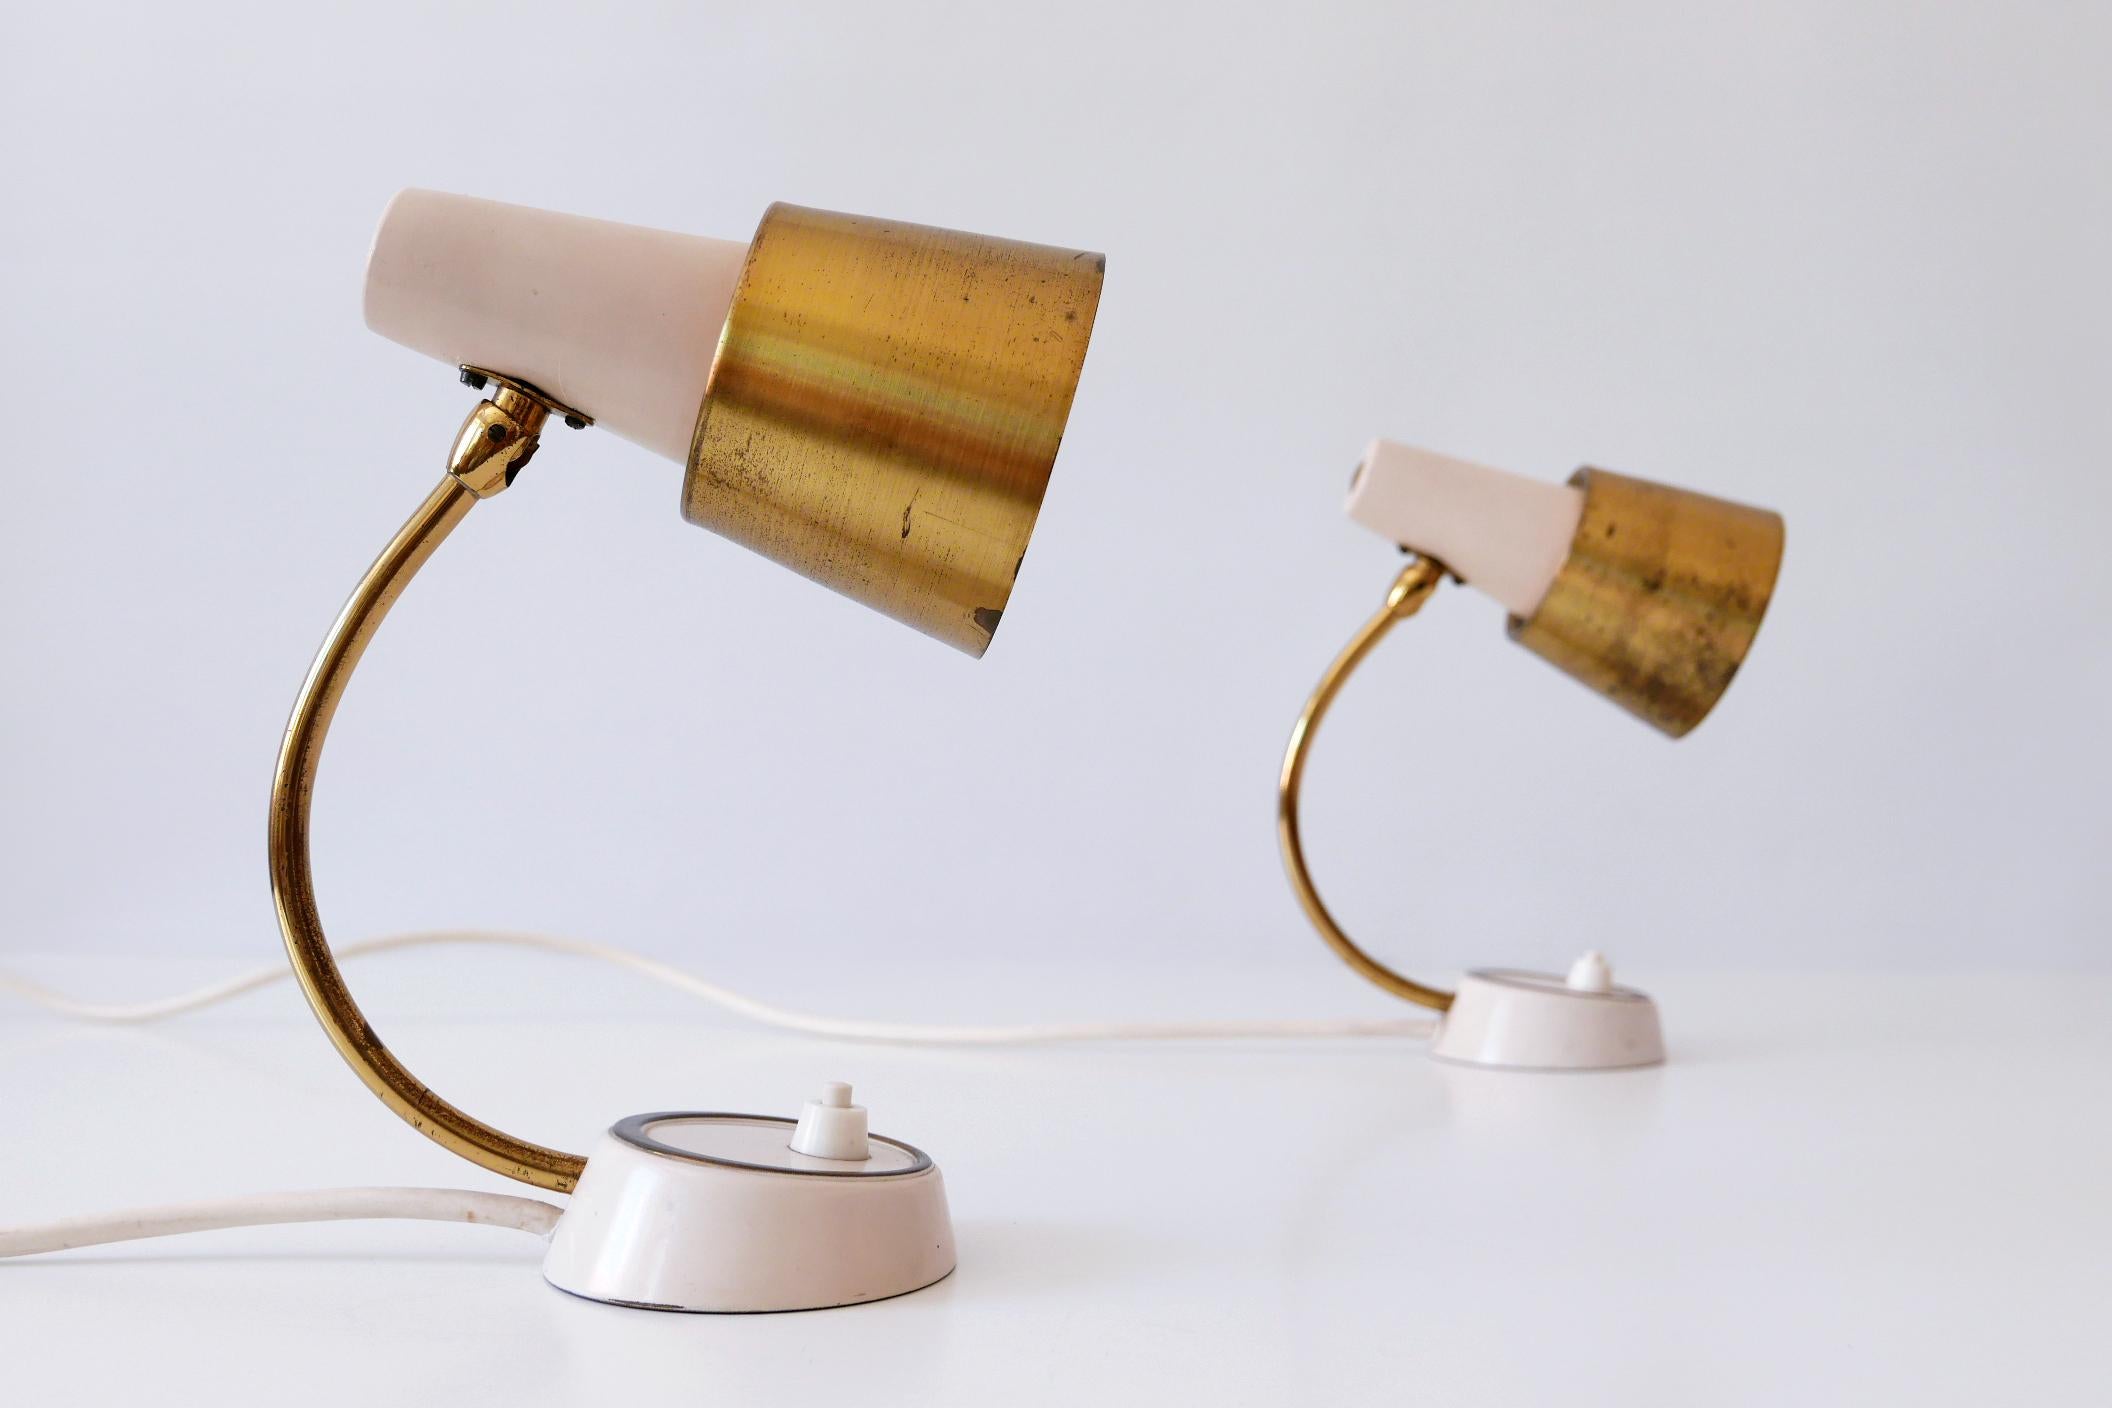 Set of Two Mid-Century Modern Bedside Table Lamps or Wall Lights, 1950s, Germany For Sale 5